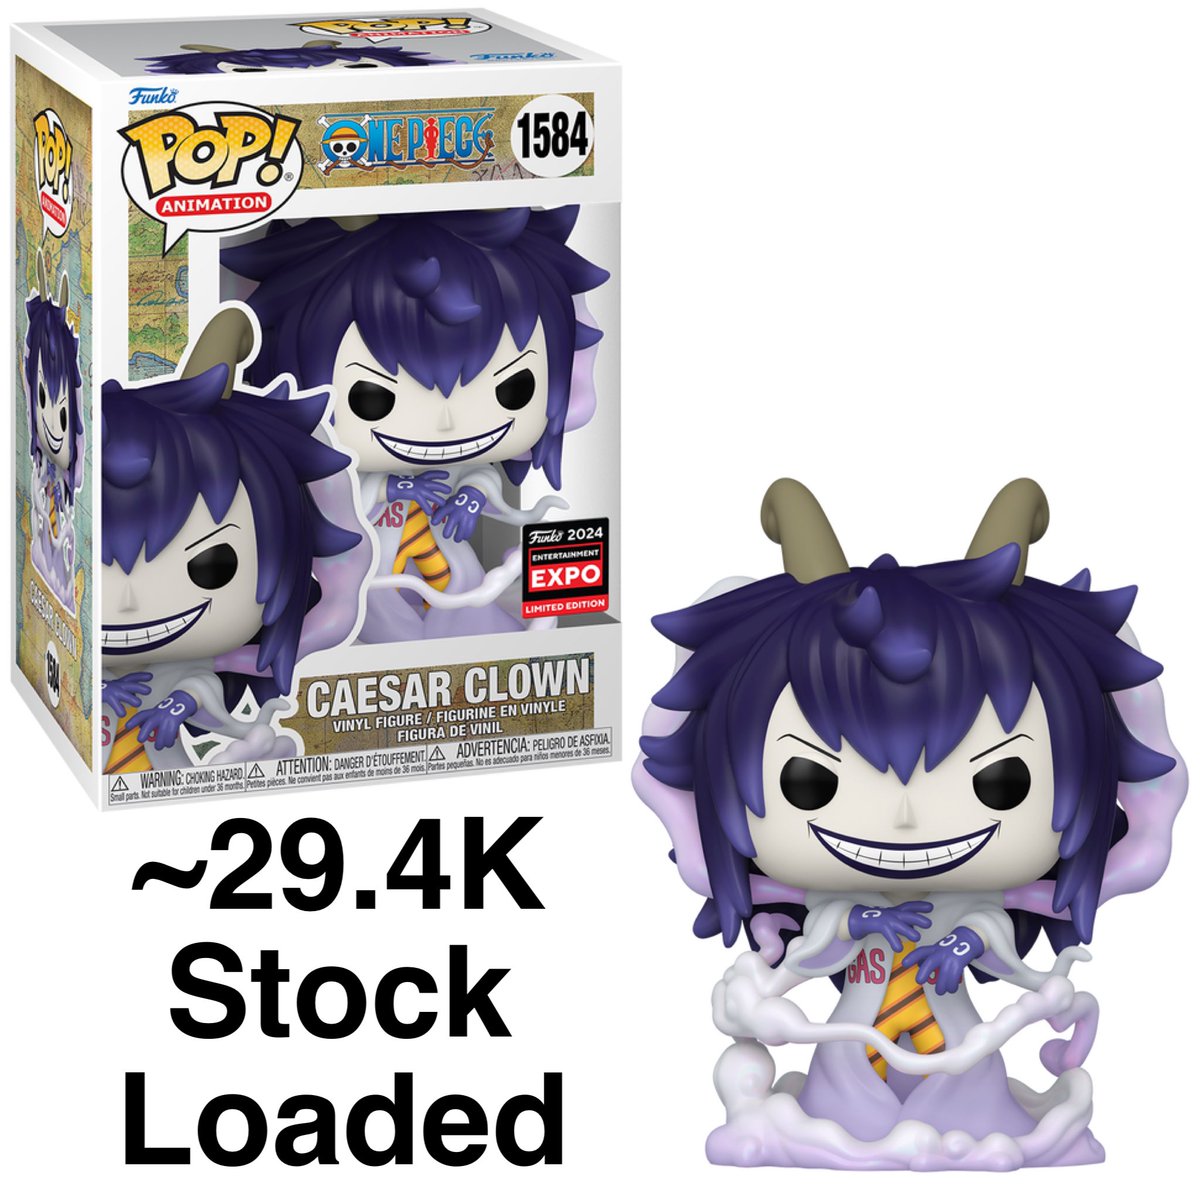 29,414 quantities are loaded of C2E2 shared exclusive Caesar Clown! This may change by the release date 4/26 at the Funko Shop.
.
distracker.info/4alfjv7 #Ad
.
Credit @pop_holmes 
#OnePiece #Funko #FunkoPop #FunkoPopVinyl #Pop #PopVinyl #Collectibles #Collectible #FunkoCollector…